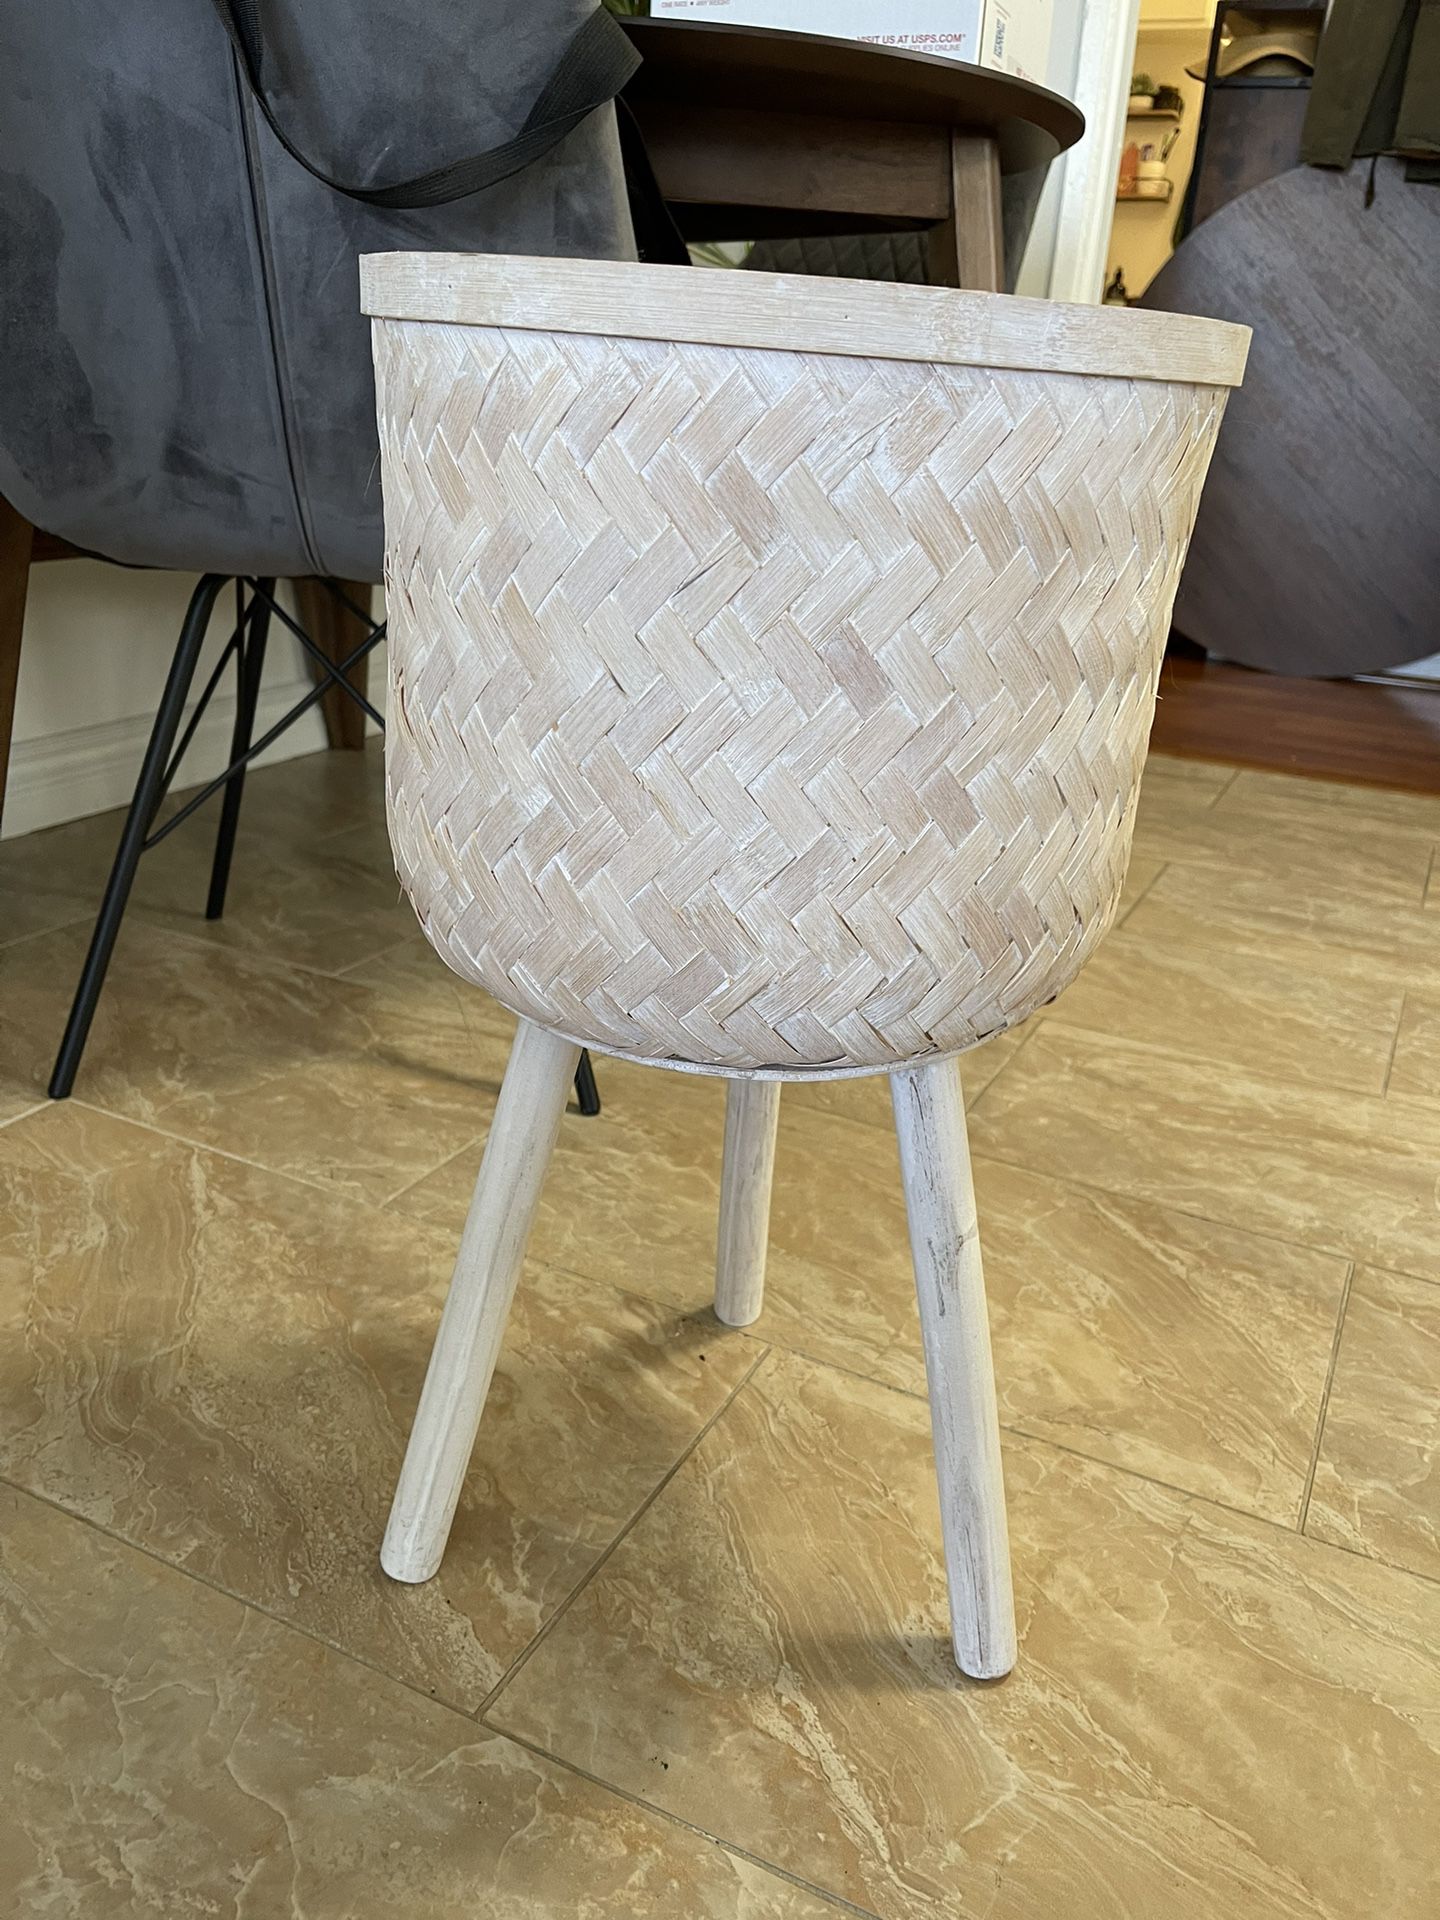 $10 OBO • Wood + Bamboo Plant Stand / Basket